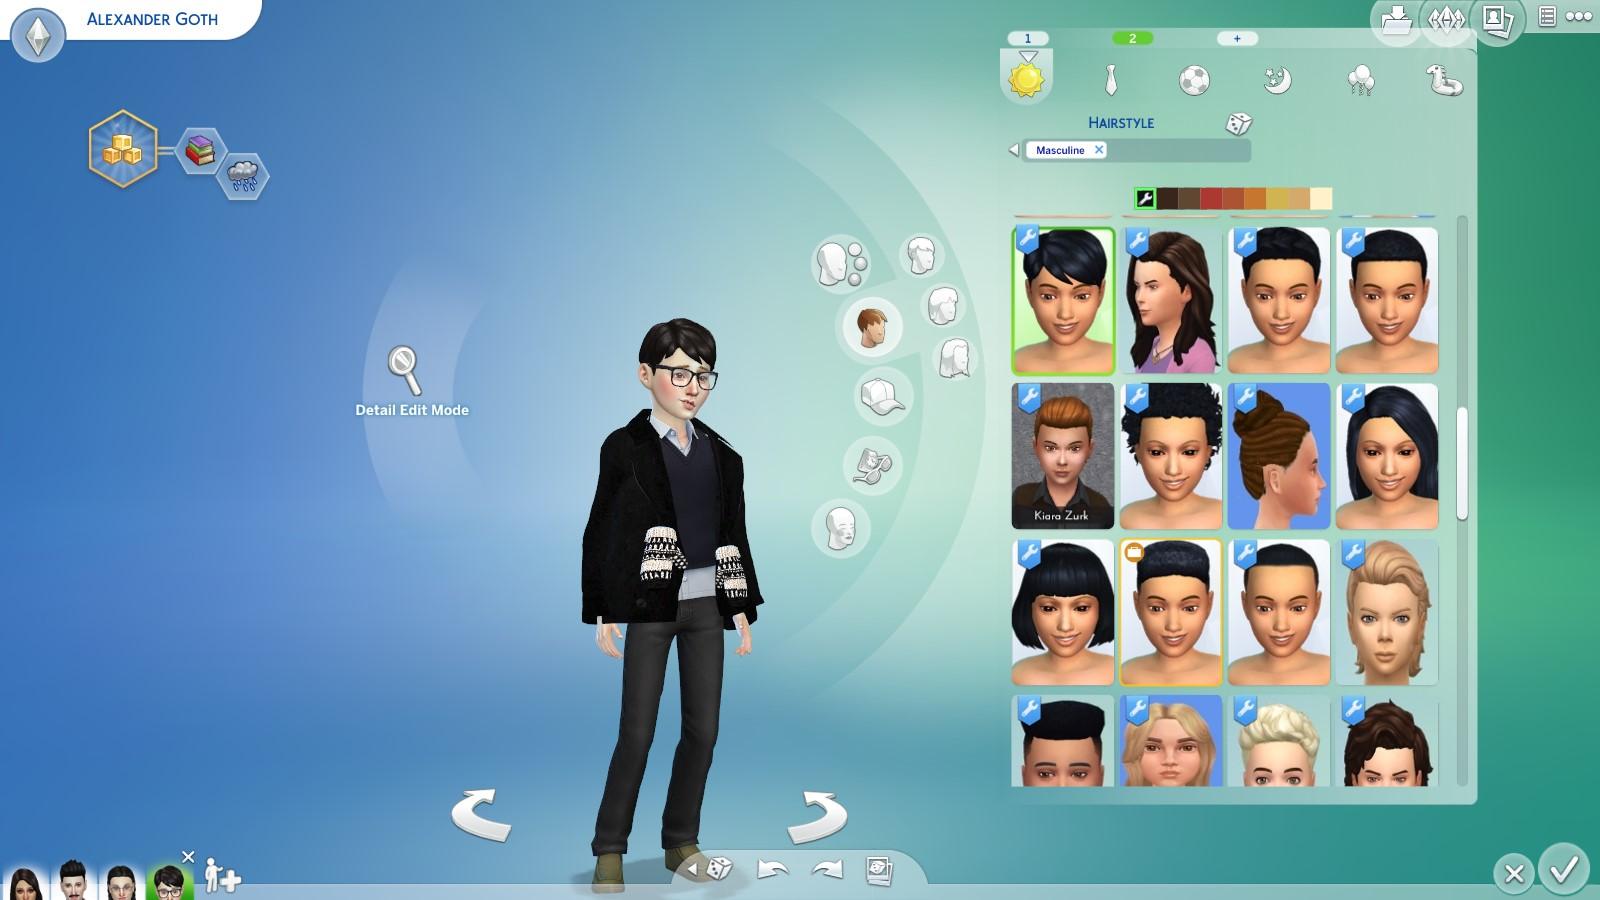 Sims 4 Black Hair and Eyebrows Texture Override (Default replacement)